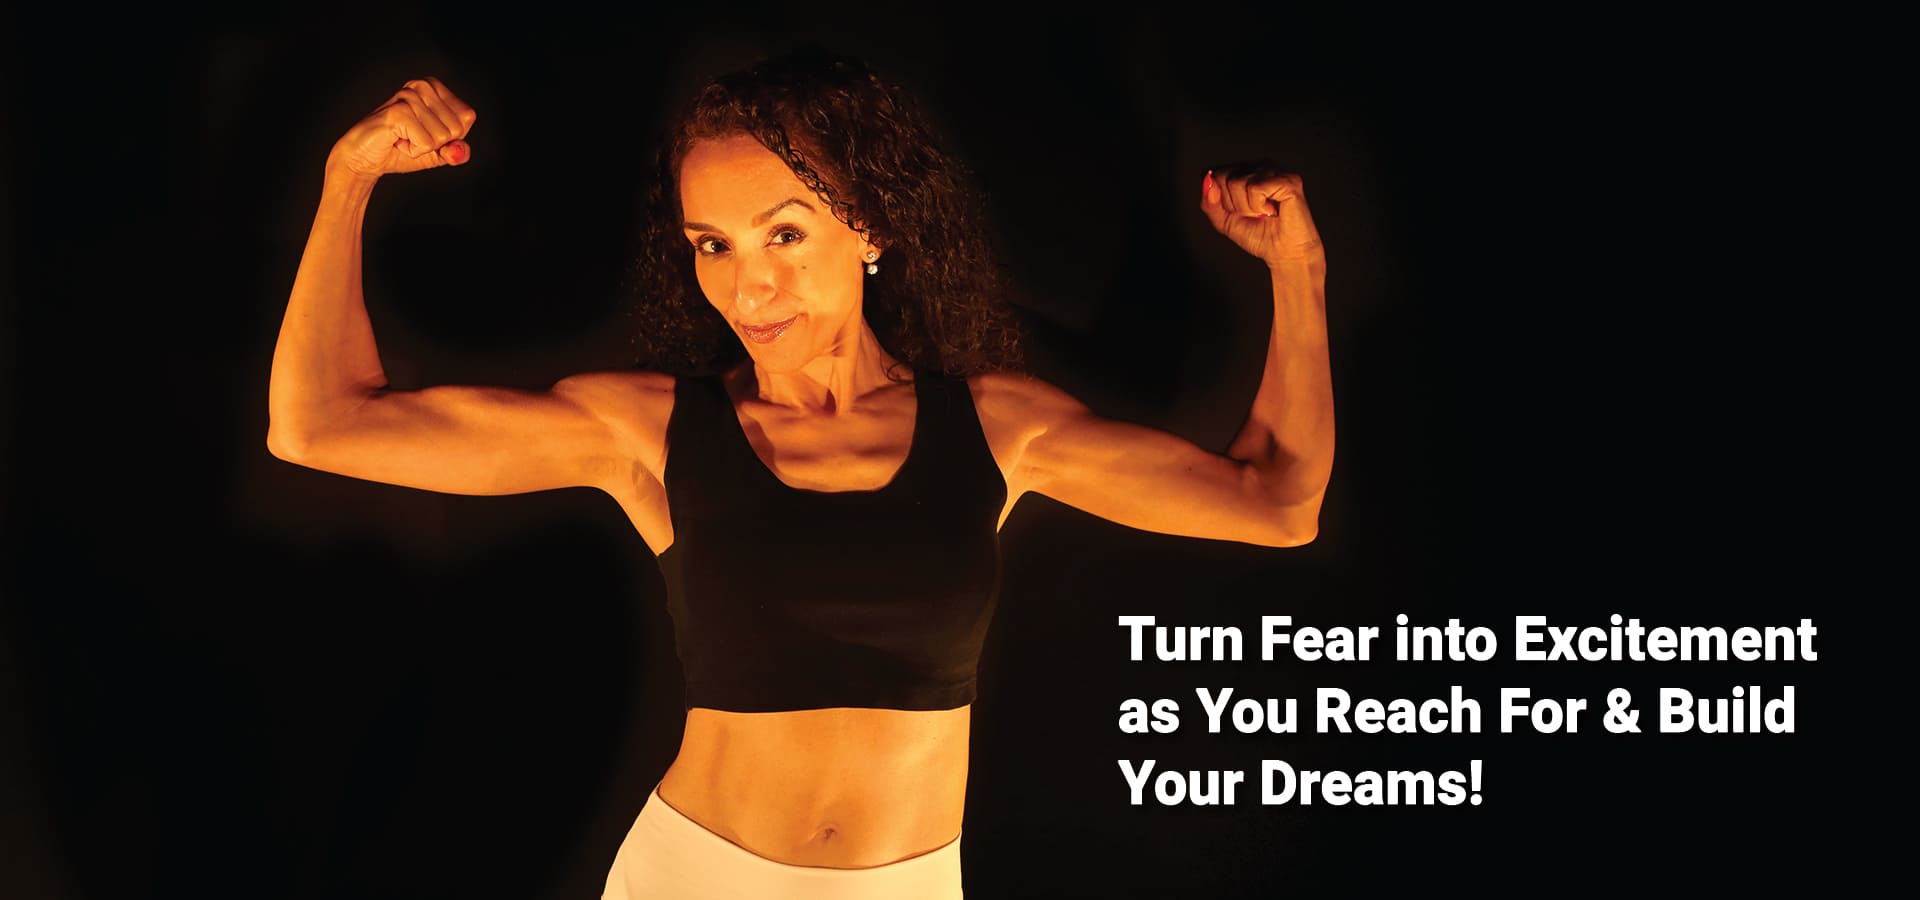 Turn Fear into Excitement as You Reach For & Build Your Dreams!l